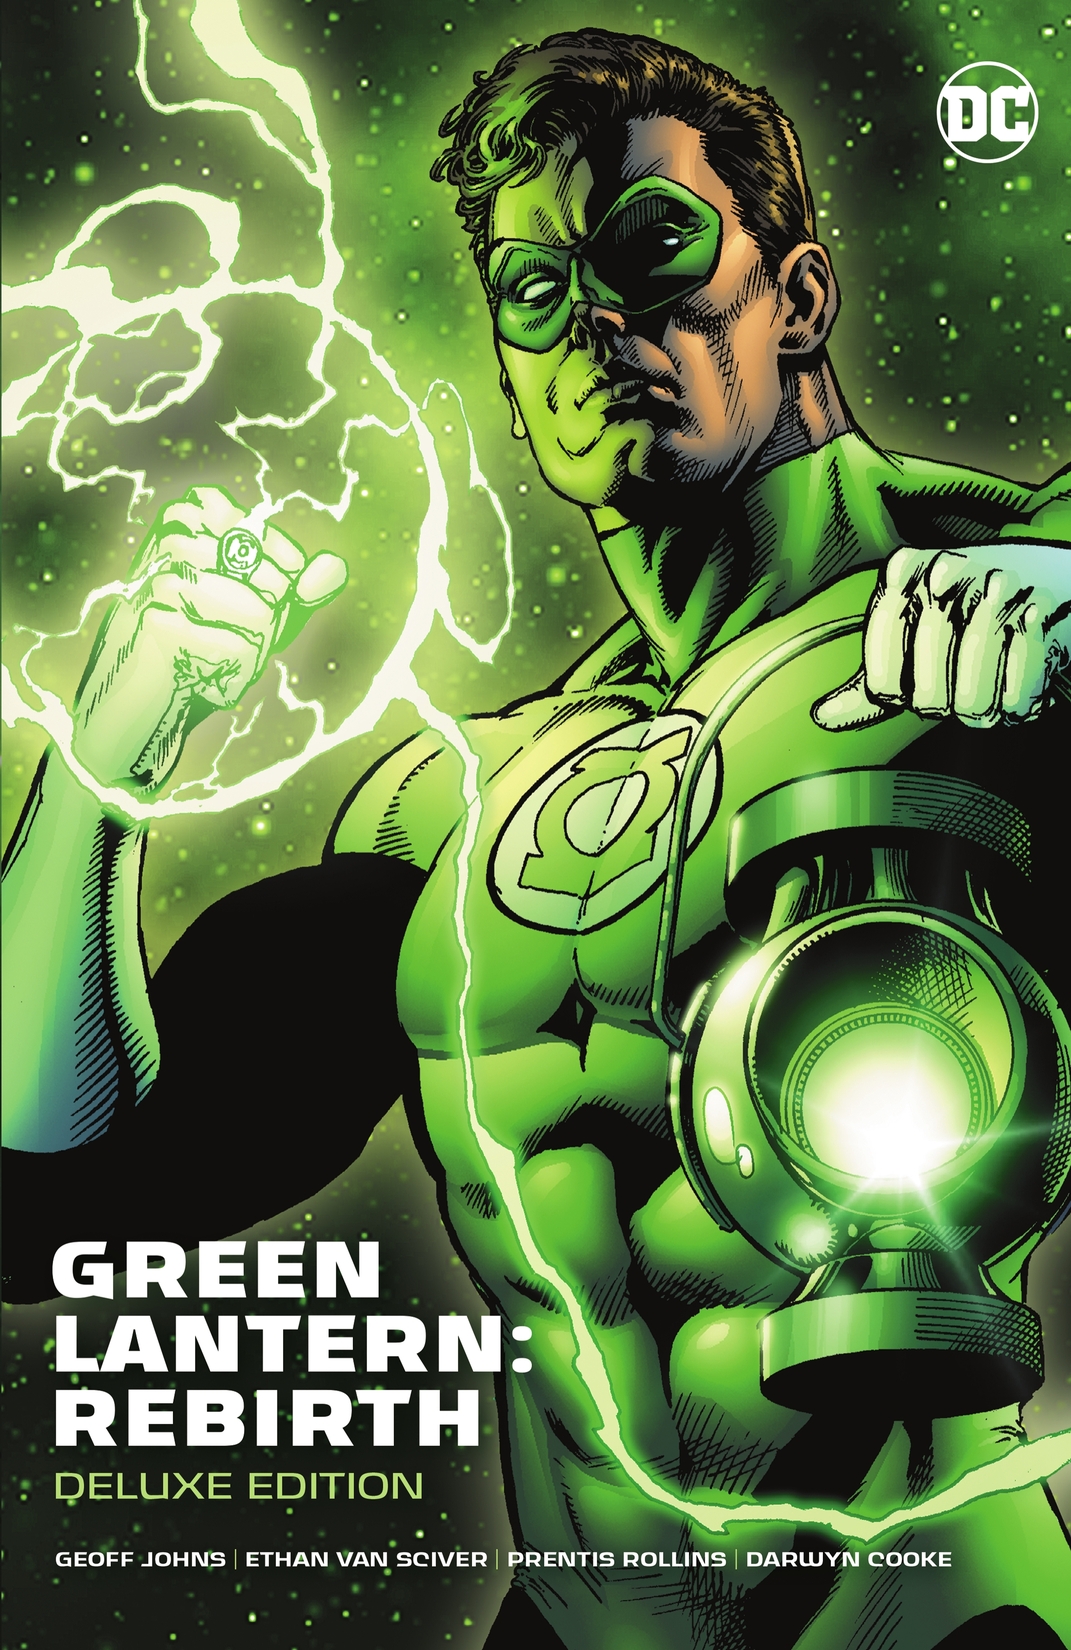 Green Lantern: Rebirth Deluxe Edition preview images